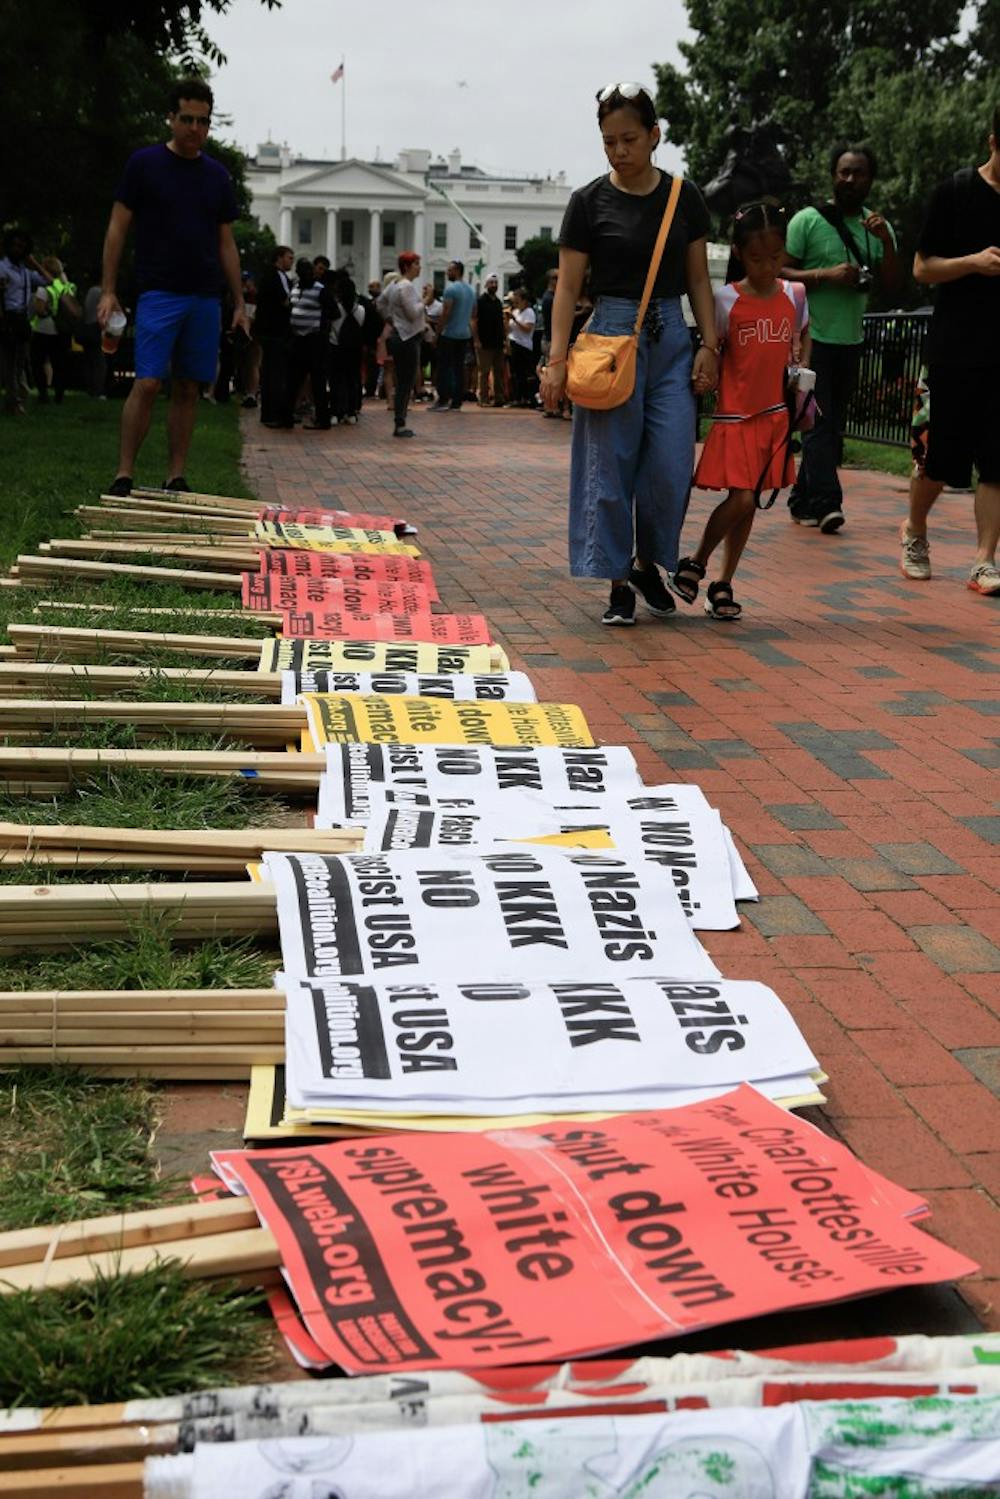 Stacked signs line the sidewalk in Lafayette Square Park on Sunday, Aug. 12, 2018 in Washington, D.C. ahead of planned protests on the anniversary of the Unite the Right rally in Charlottesville, Va. (Darryl Smith/TNS)